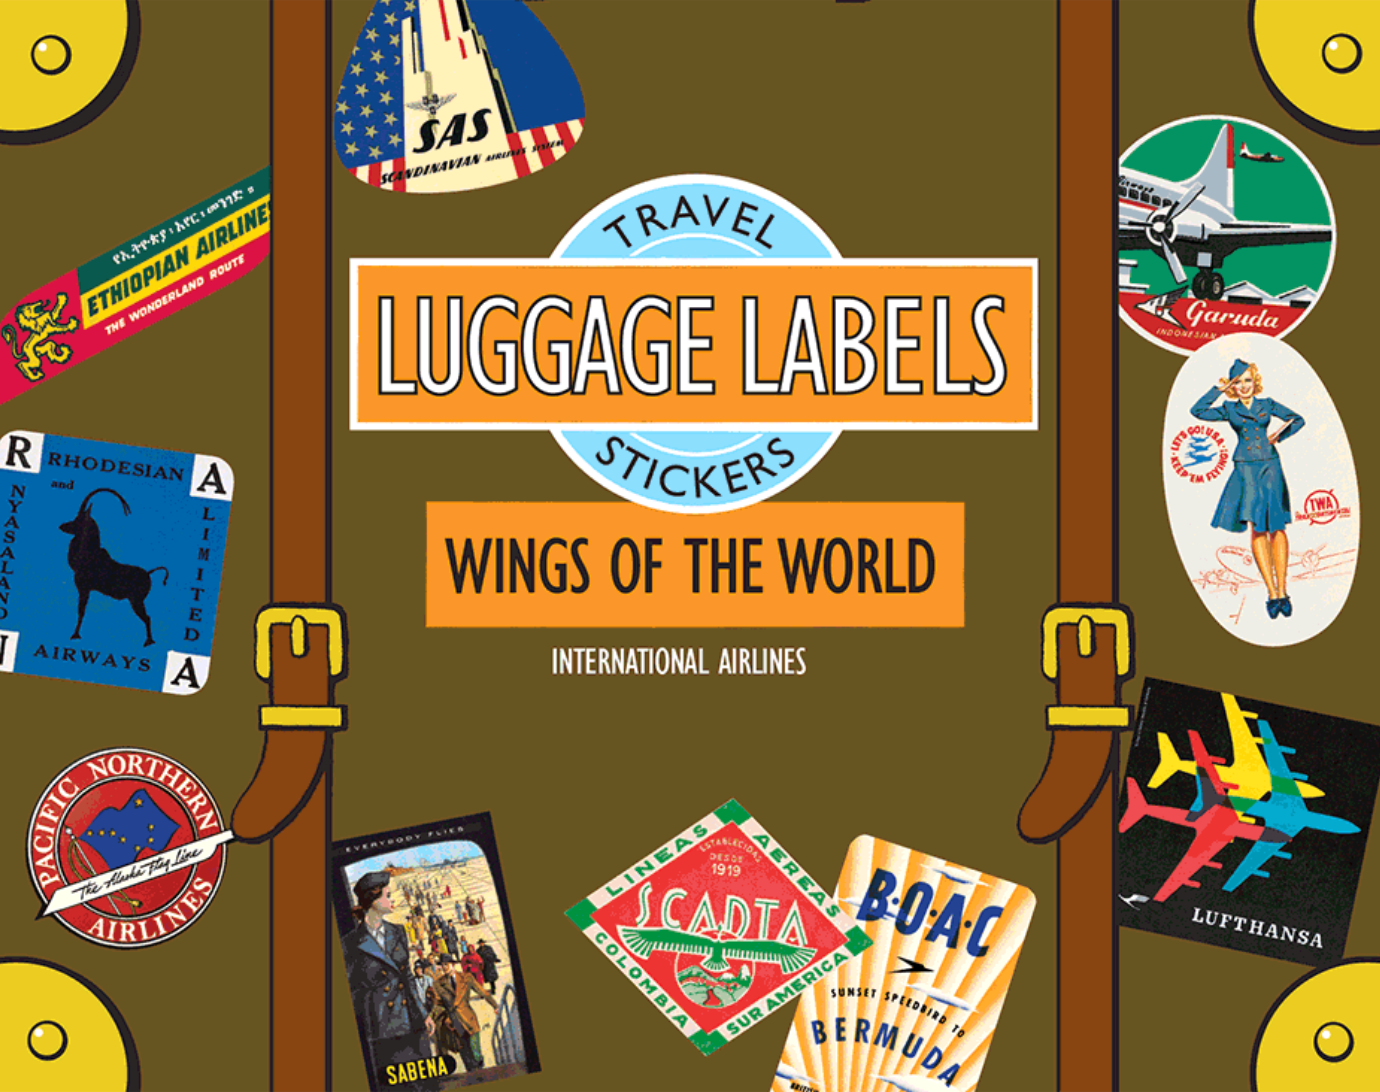 The front of Laughing Elephant's Wings of the World - Travel Label Sticker Box